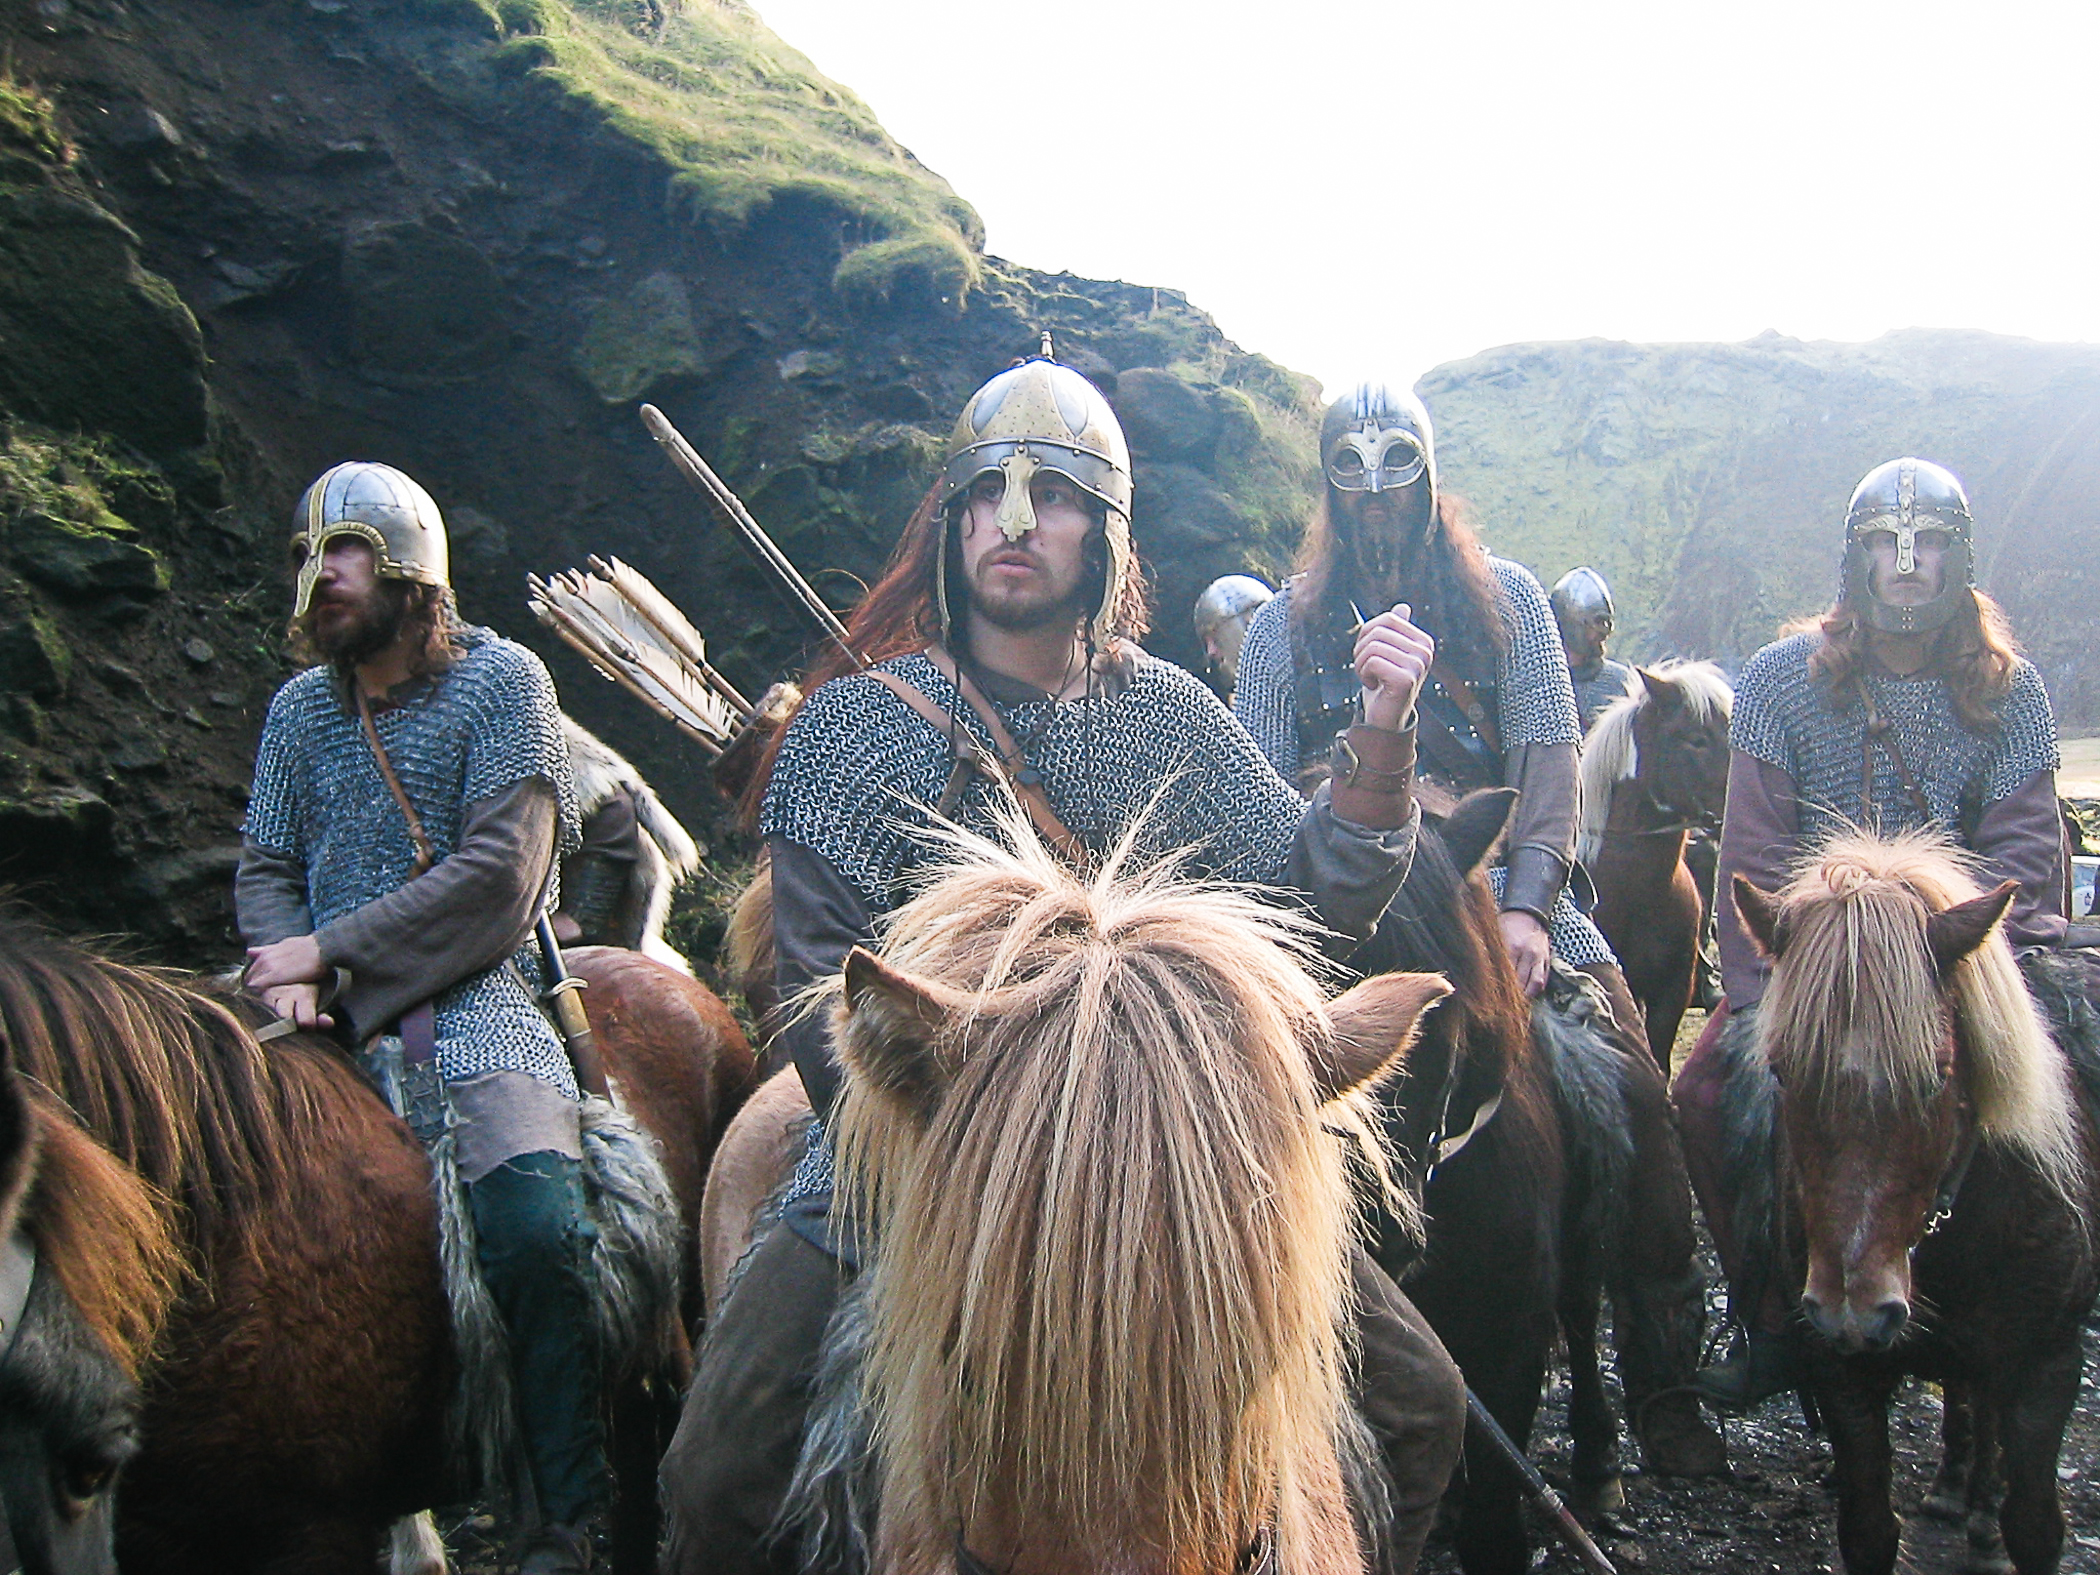 Martin Delaney as Viking archer-scout Thorfinn, on location in Iceland